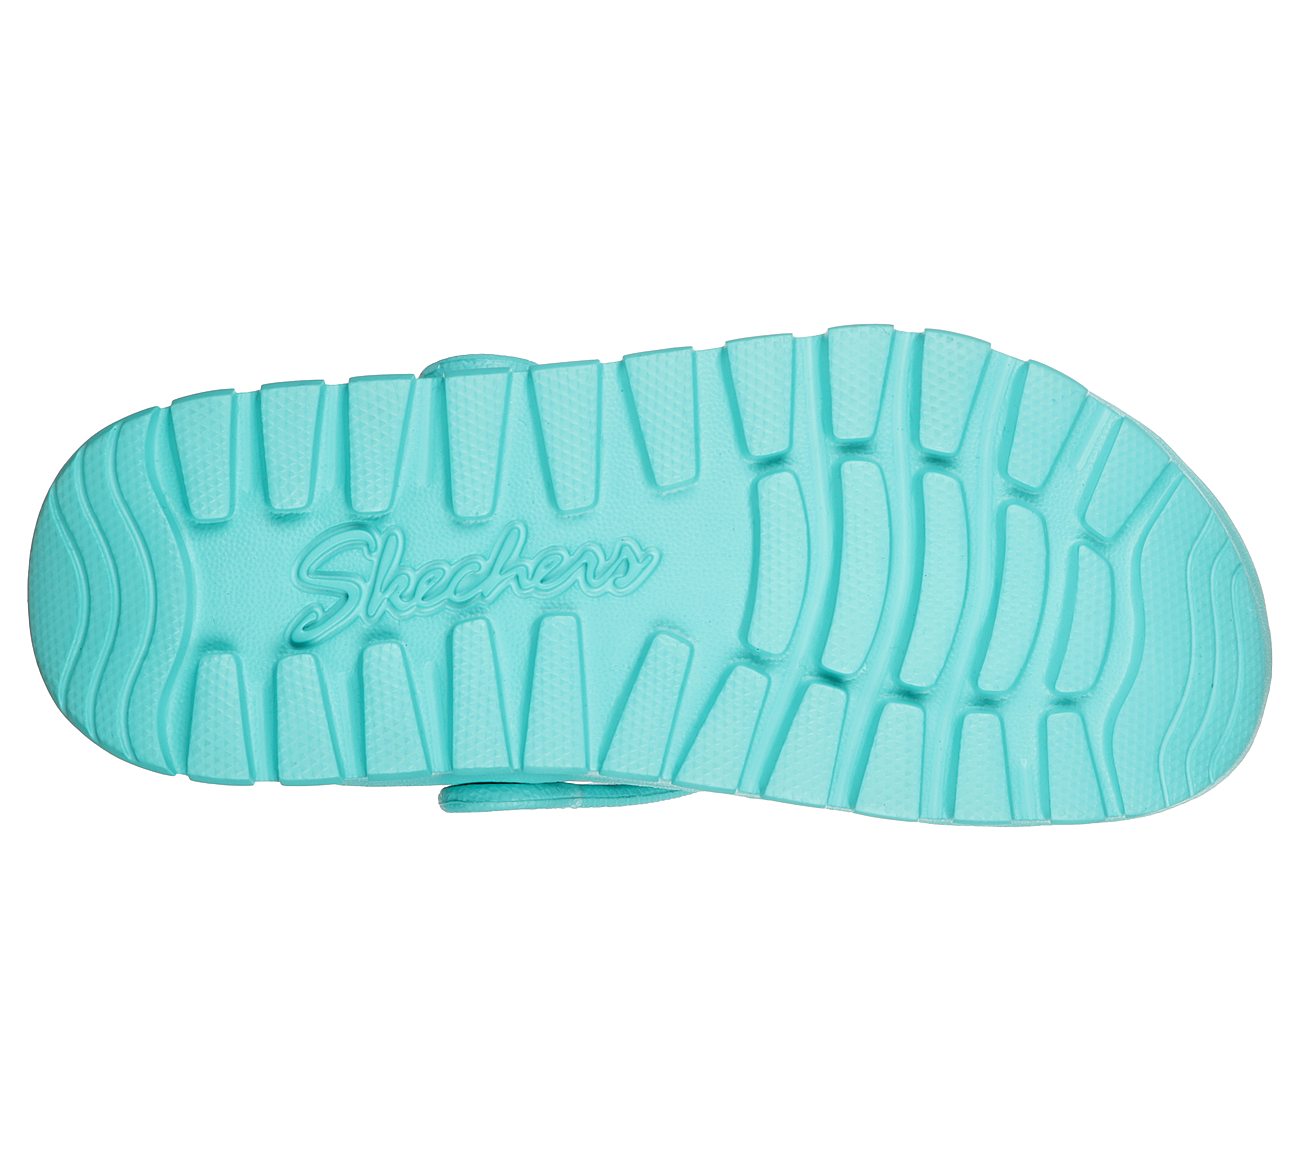 FOOTSTEPS - TRANSCEND, TURQUOISE Footwear Bottom View